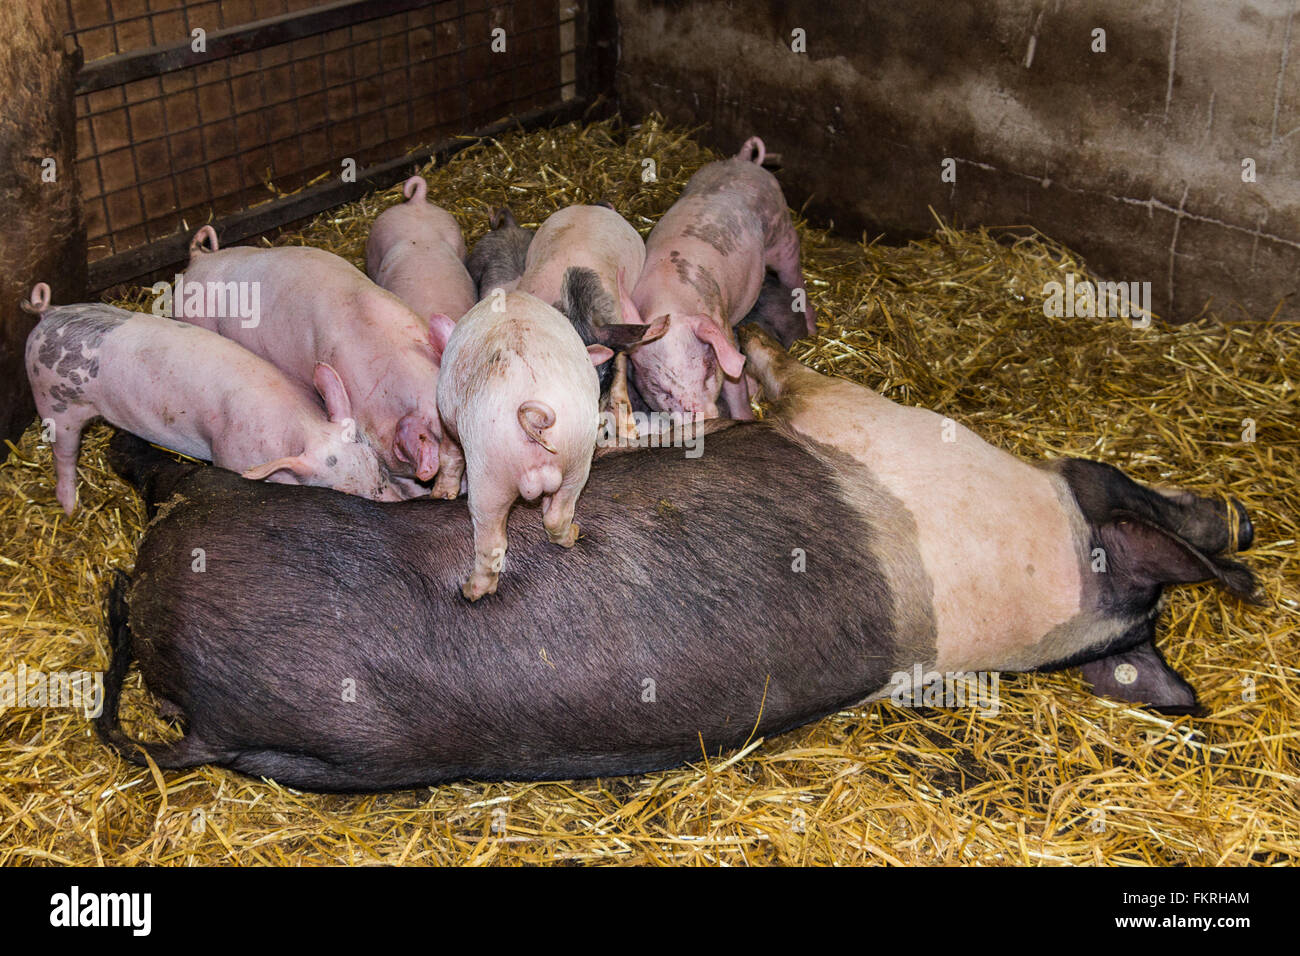 Young pigs suckling from mother cheeky one standing on top showing rear with curley tail and male genitalia. Humorous image. Stock Photo